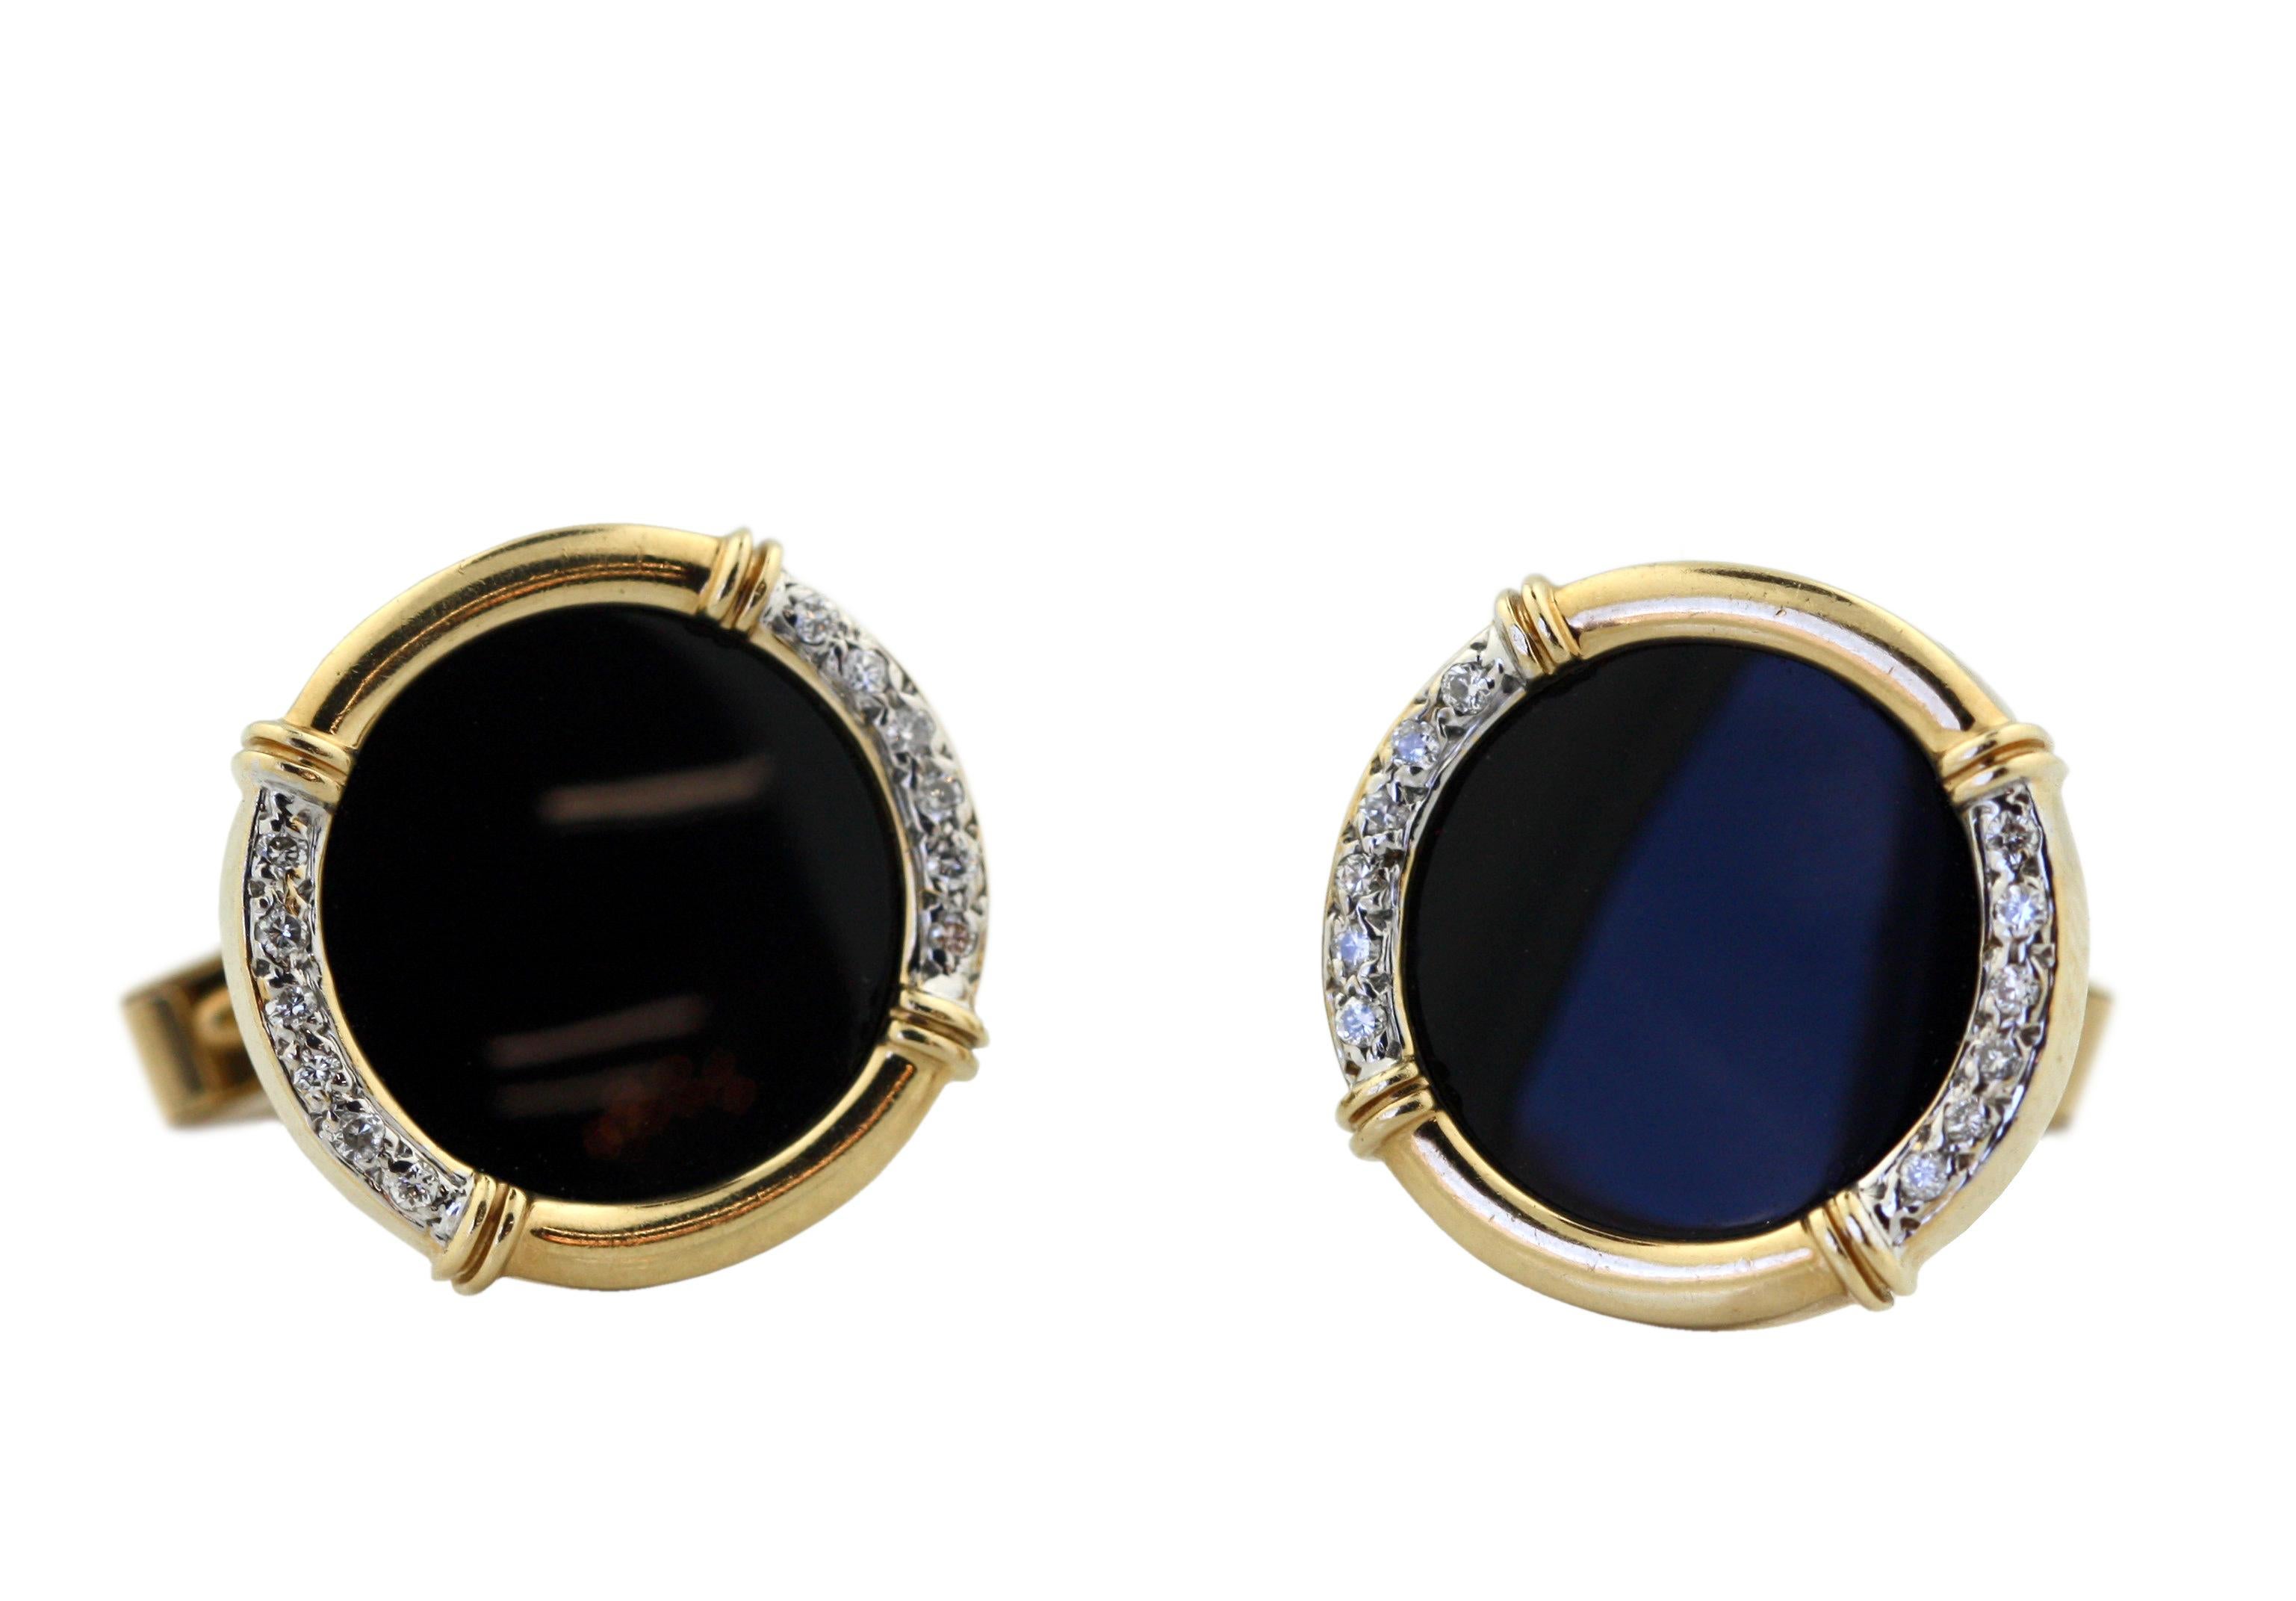 Pair of 14kt Yellow Gold, Onyx and Diamond Cufflinks In Good Condition For Sale In Palm Beach, FL